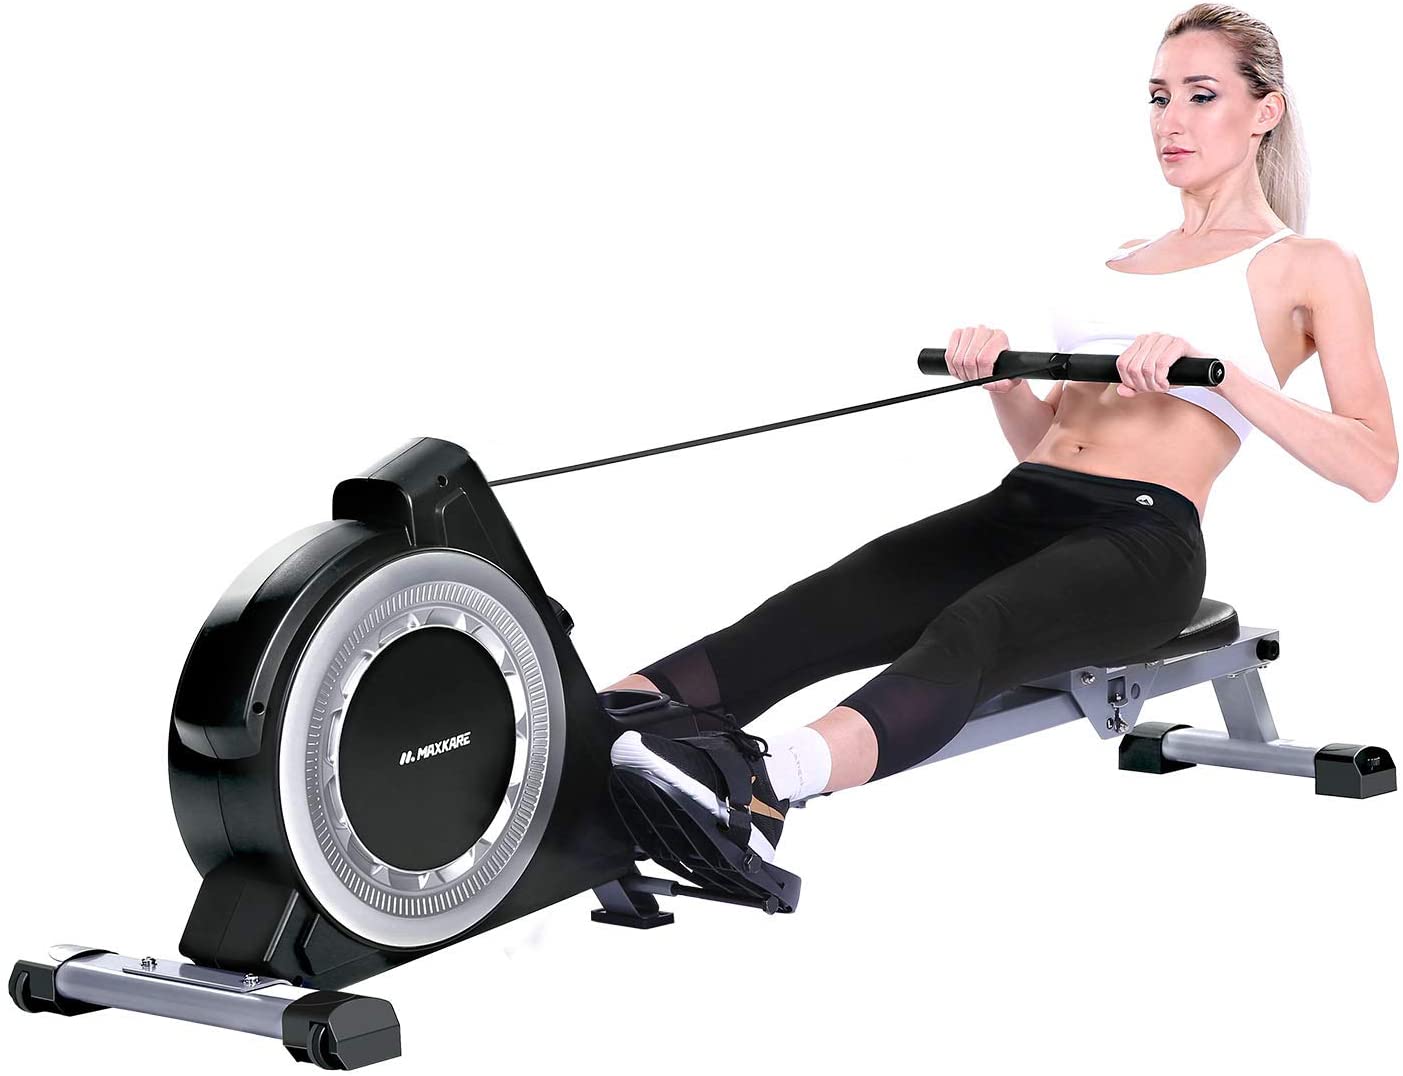 MaxKare Magnetic Rowing Machine